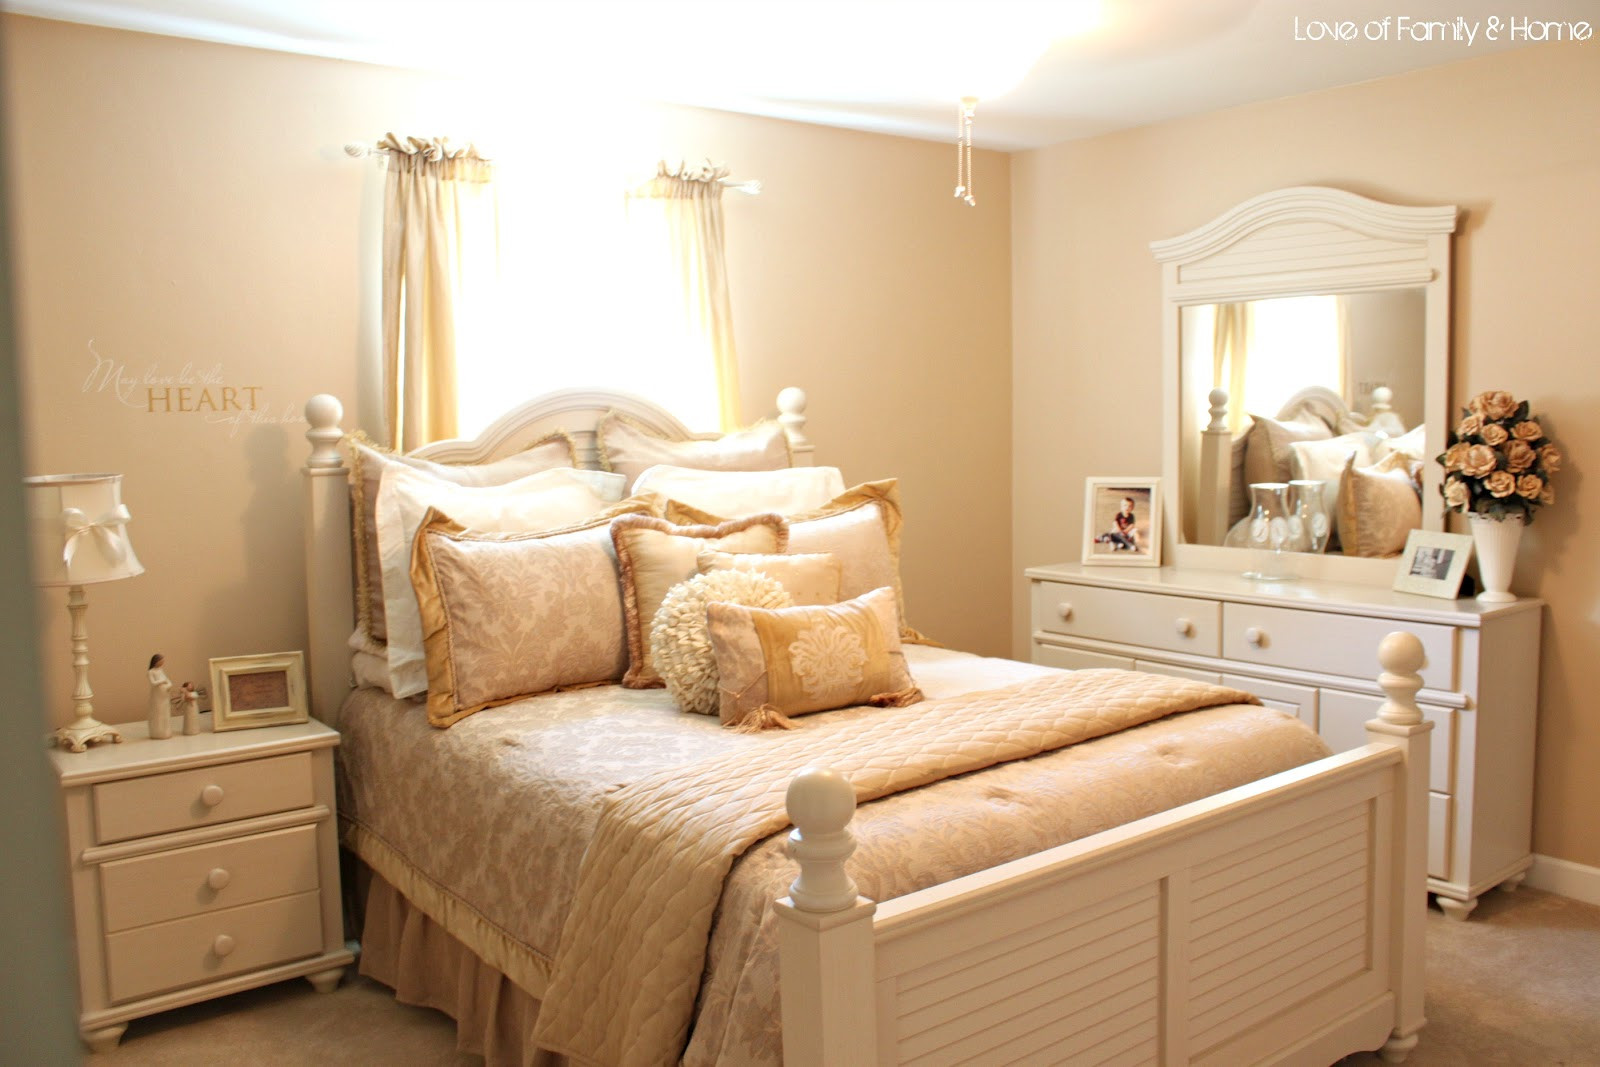 Master Bedroom Makeovers
 10 Cottage Style Bedrooms Makeover Inspiration Love of